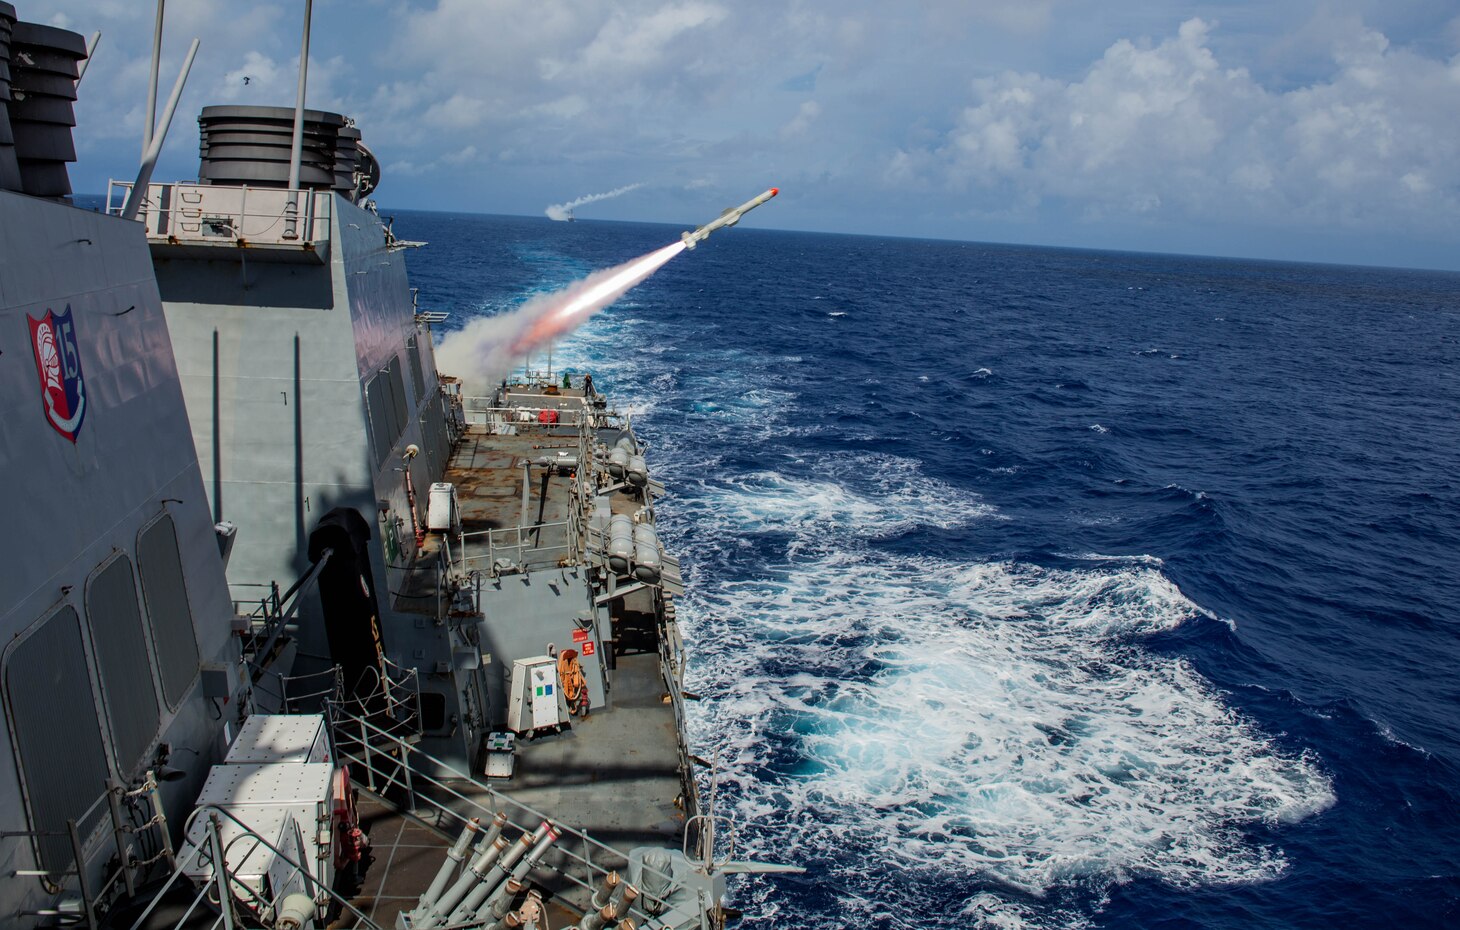 (Sept. 13, 2016) The Arleigh Burke-class guided-missile destroyer USS Benfold (DDG 65) conducts a live fire of a harpoon missile, with the Arleigh Burke-class guided-missile destroyer USS John S. McCain (DDG 56), as part of a sink exercise (SINKEX) during Valiant Shield 2016. Valiant Shield is a biennial, U.S. only, field-training exercise with a focus on integration of joint training among U.S. forces. This is the sixth exercise in the Valiant Shield series that began in 2006. Benfold is on patrol with Carrier Strike Group Five in the Philippine Sea supporting security and stability in the Indo-Asia-Pacific region. (U.S. Navy photo by Sonar Technician (Surface) 2nd Class Aaron Lyons/Released)